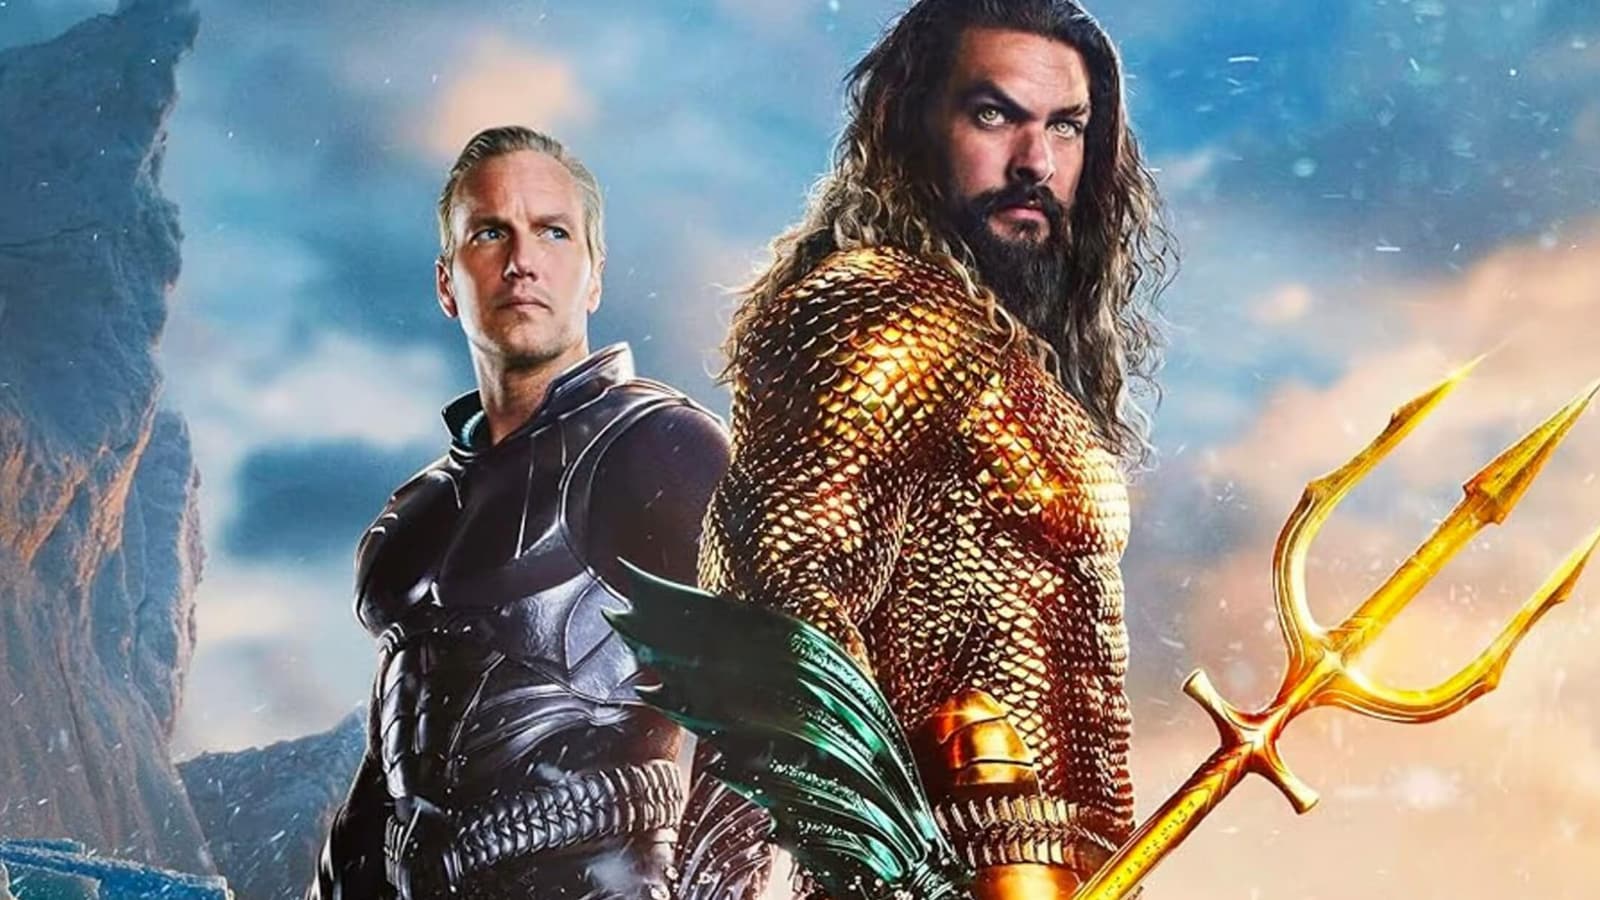 Aquaman 2 battles with a sluggish start and disappointing box office numbers: ‘Negative buzz hits’